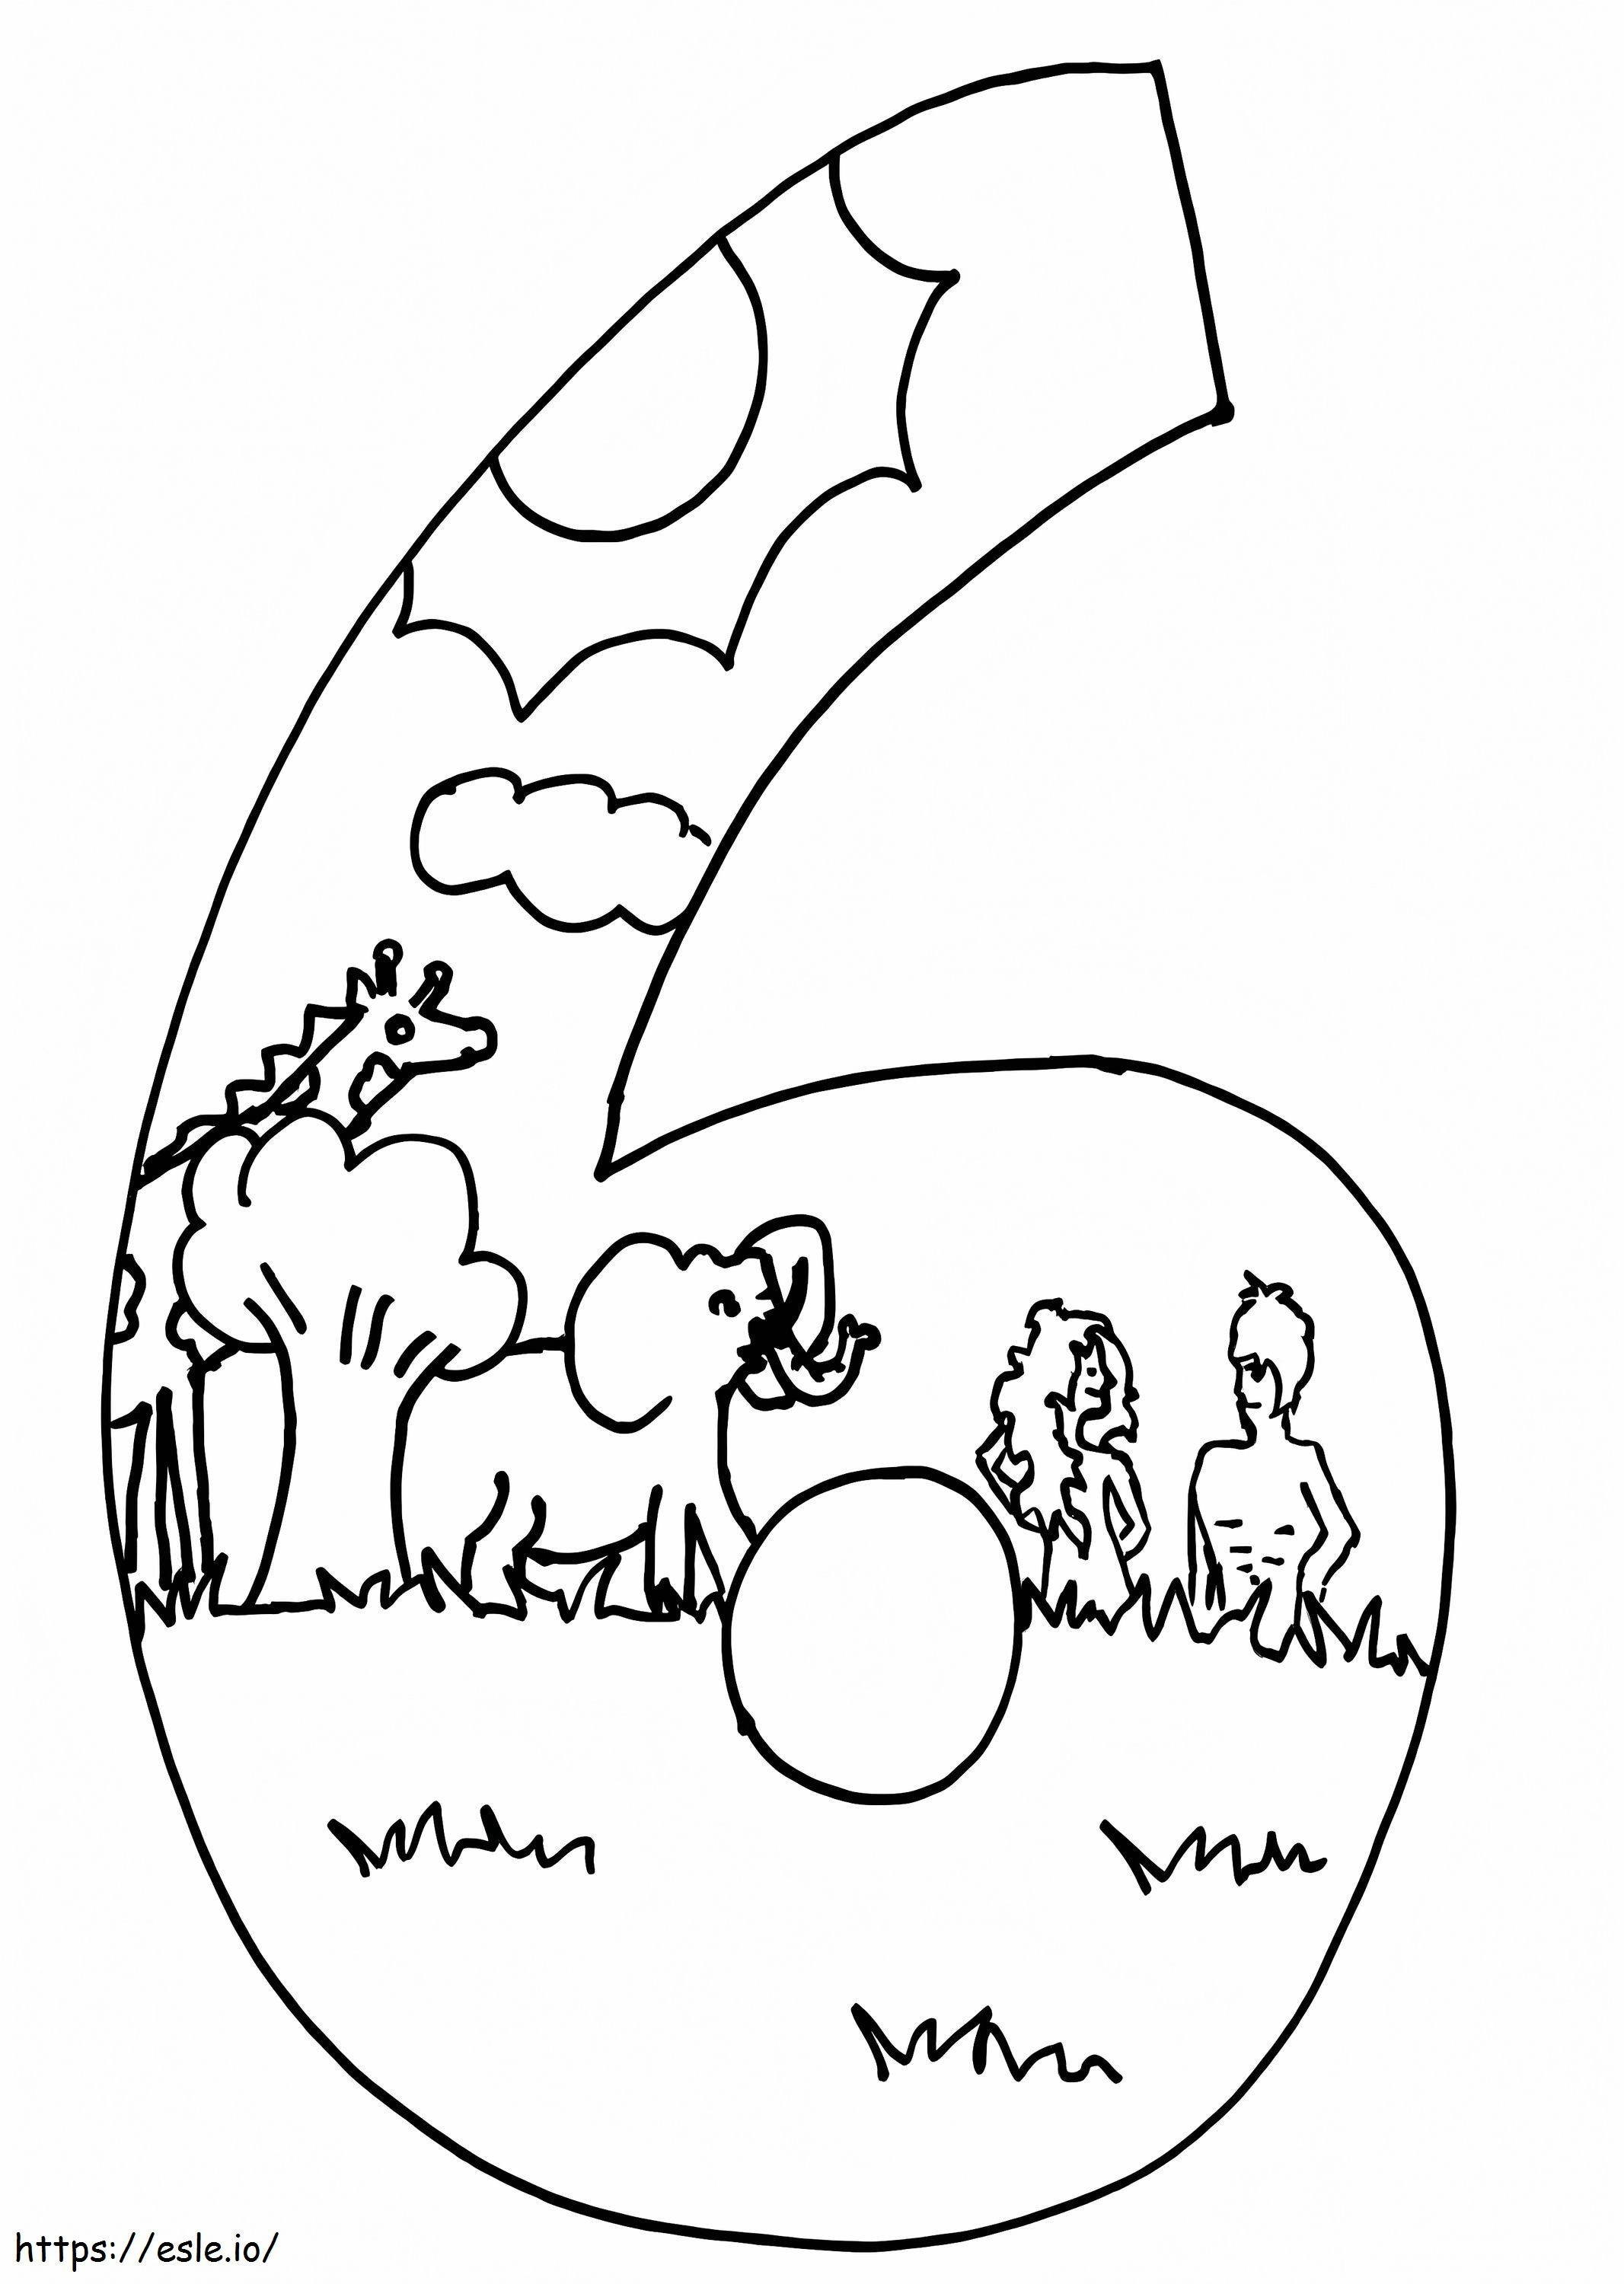 Day of creatn coloring page